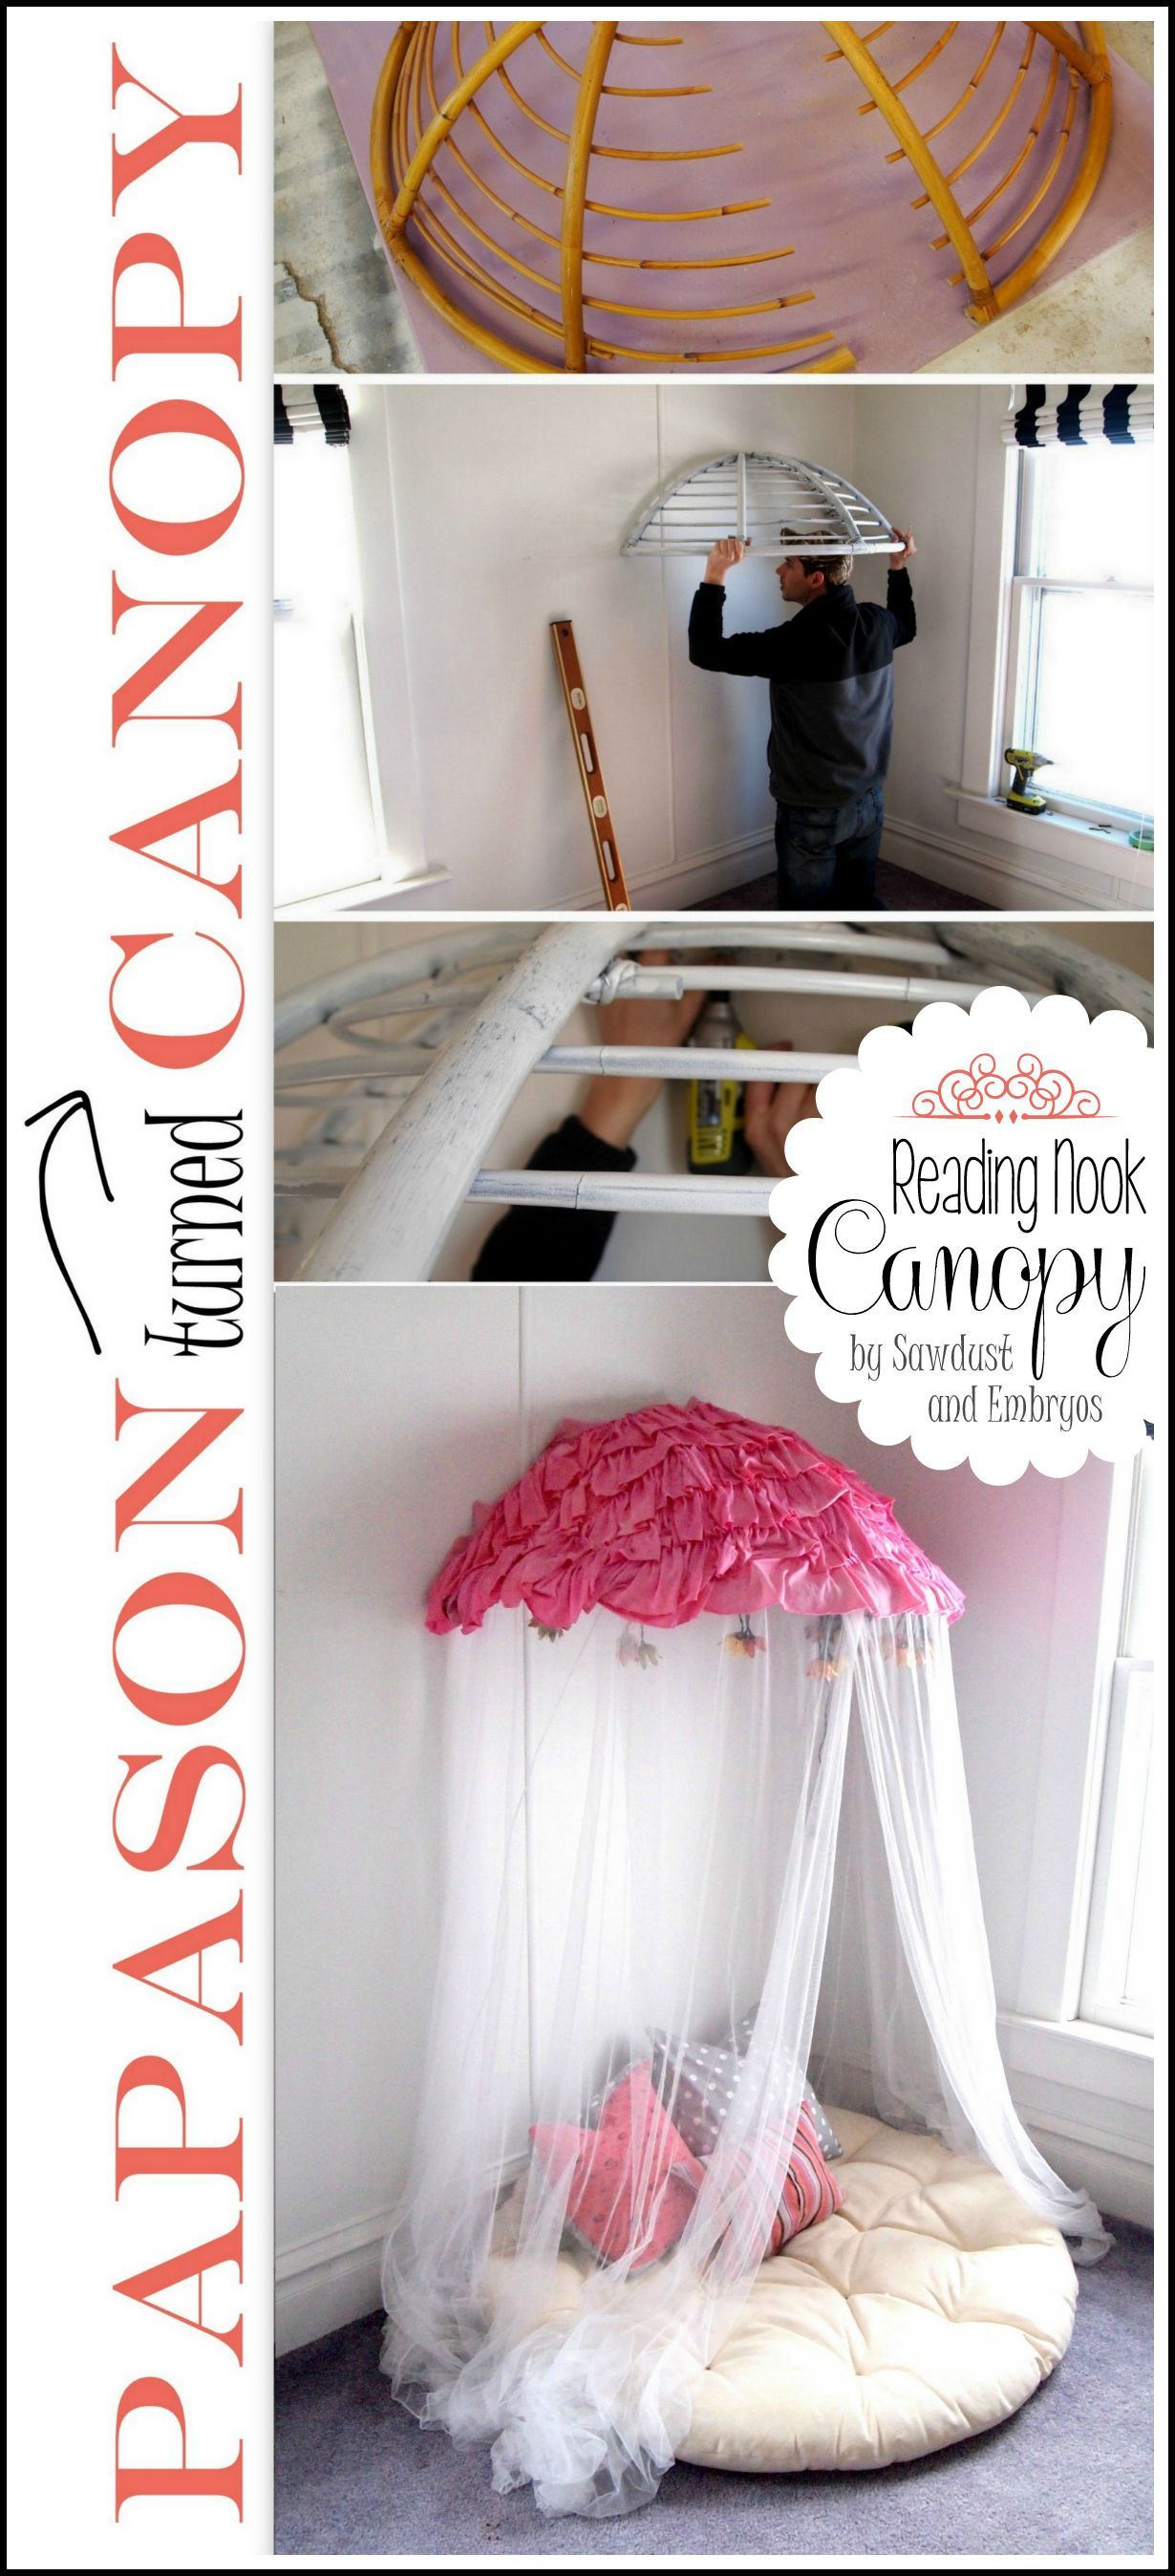 Have an old papason chair? Turn it into a fun canopy/reading nook for your littles! SO FUN! {Sawdust and